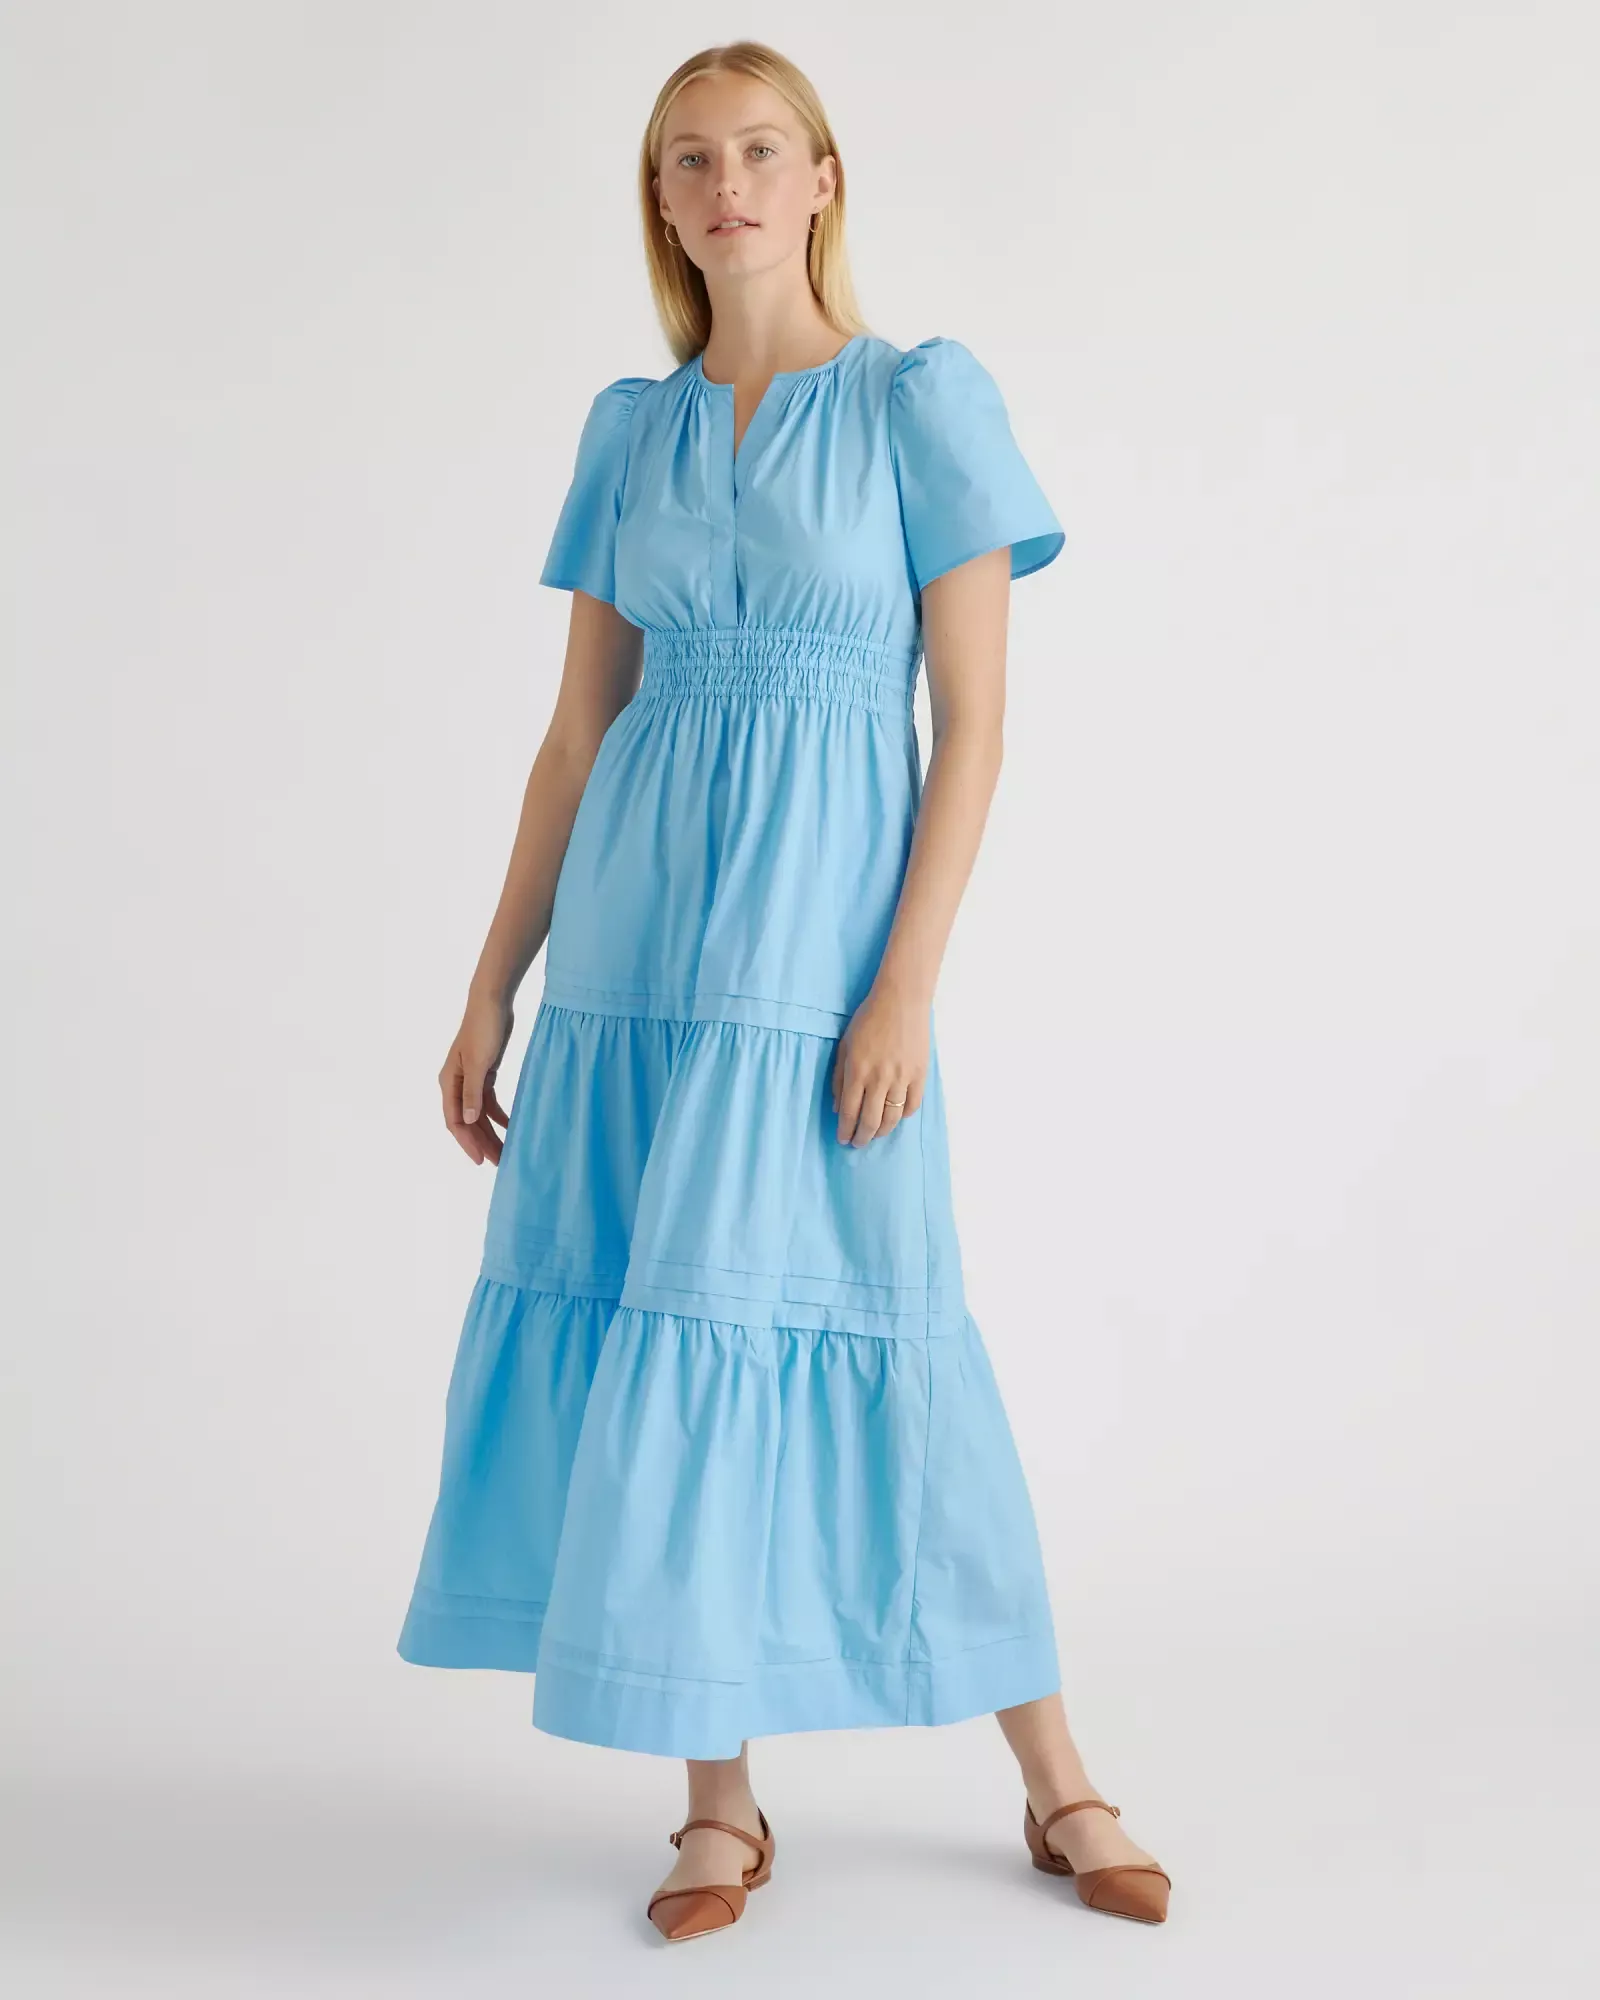 Trick or Chic: An Honest Review of Quince's Cotton Tiered Maxi Dress